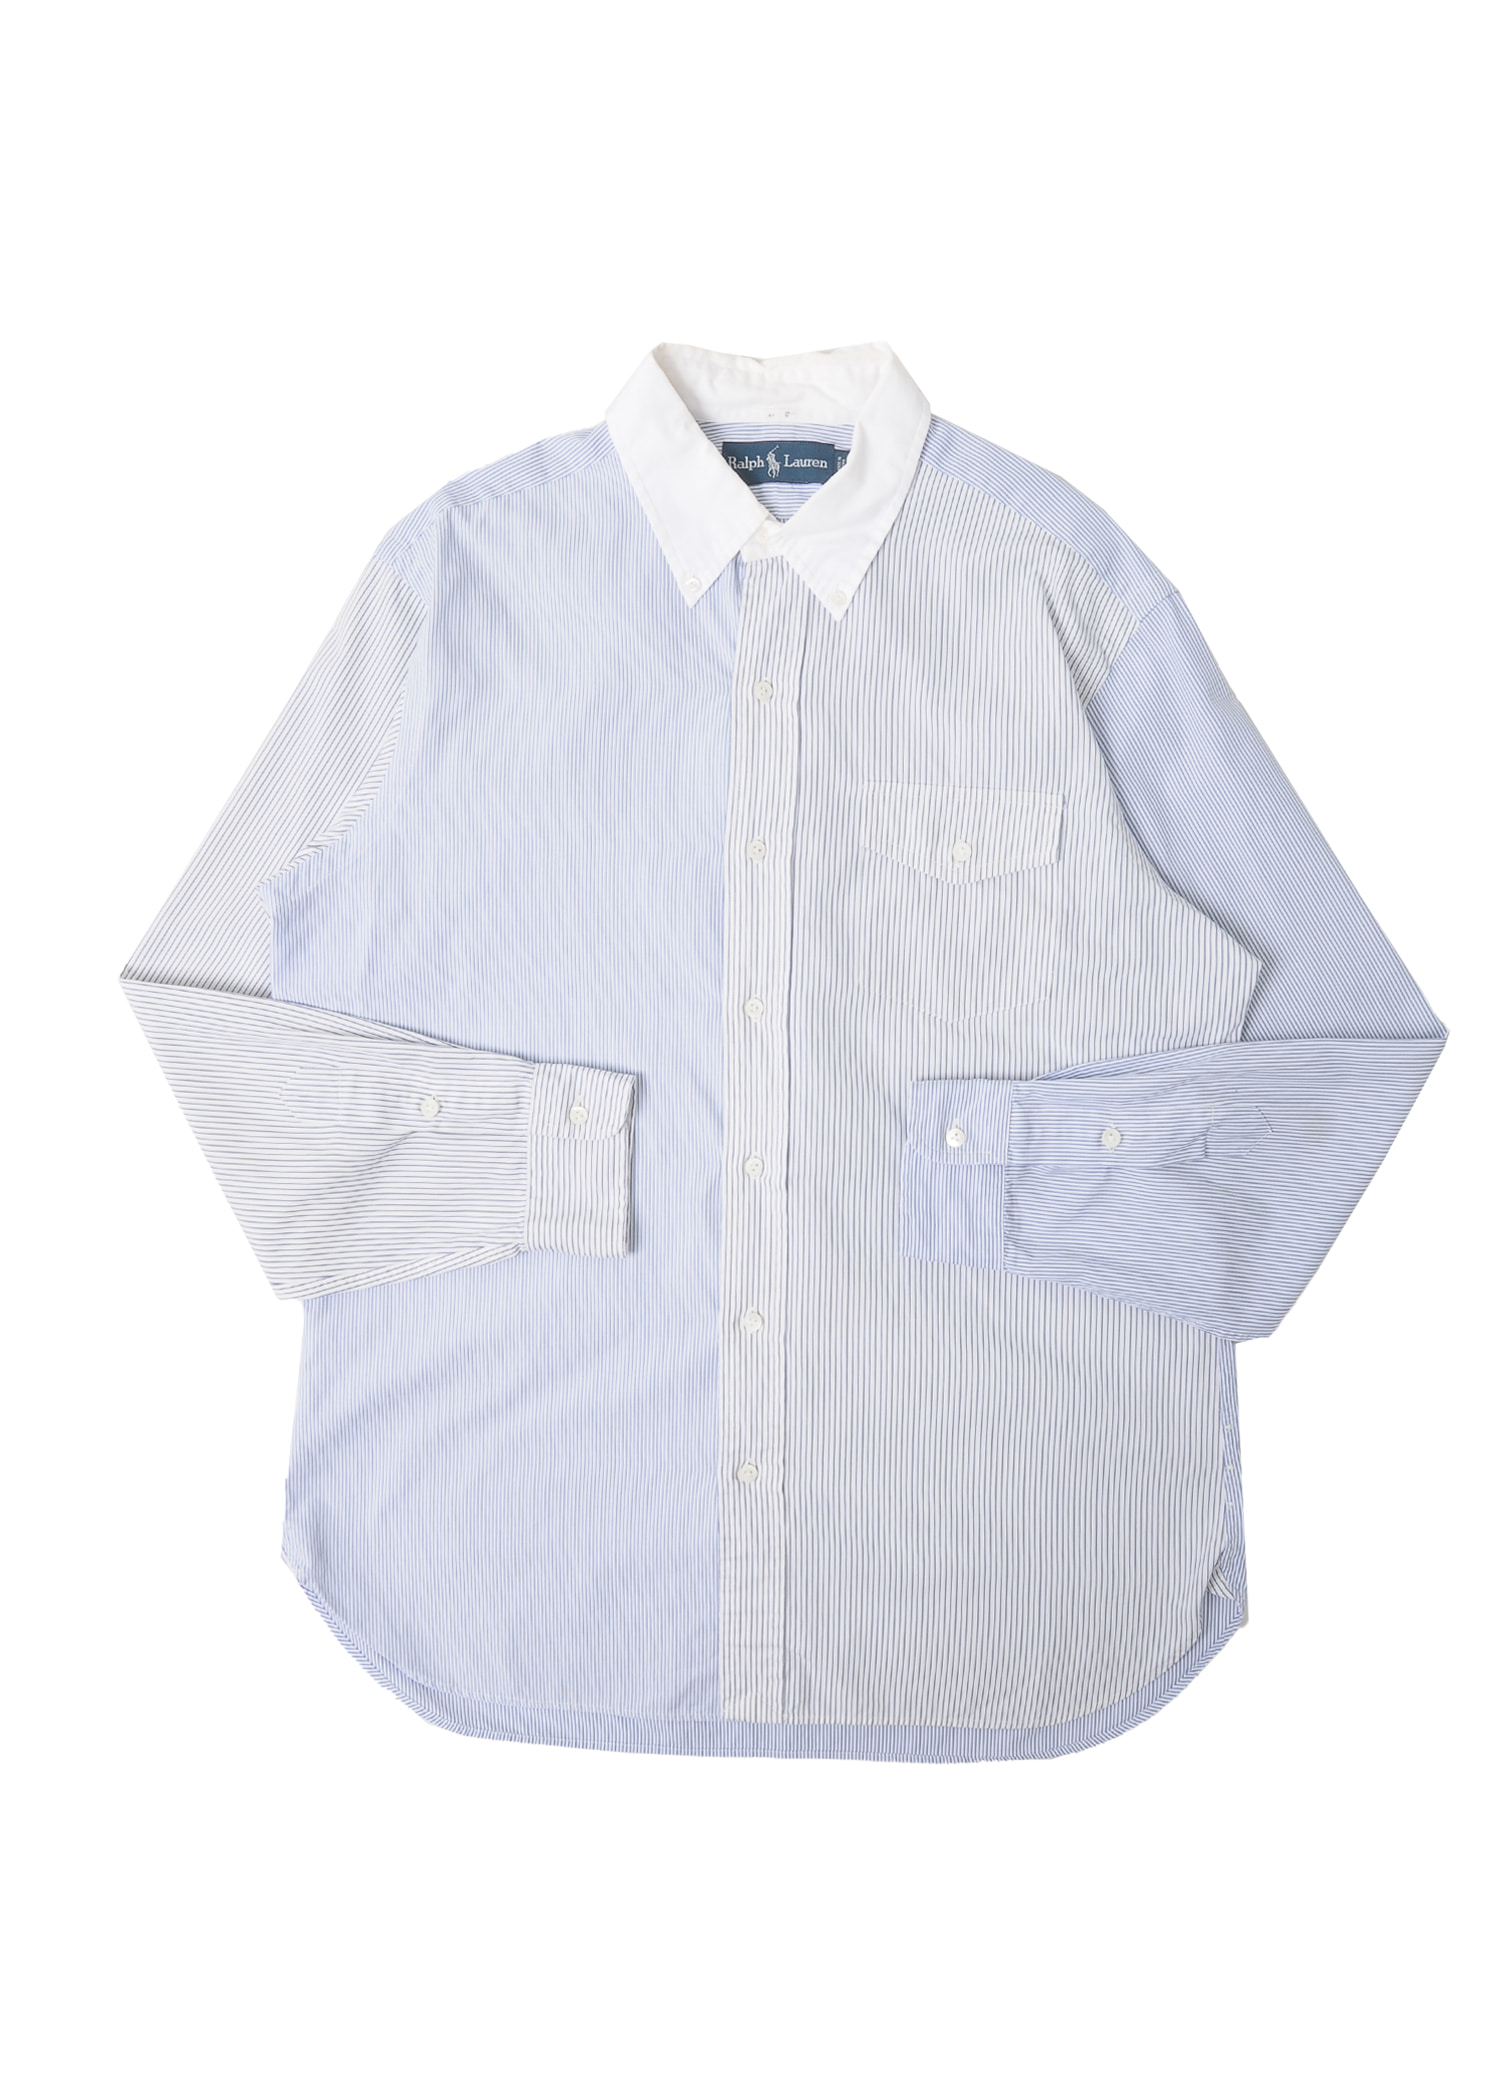 Polo by Ralph Lauren crazy pattern cleric shirt